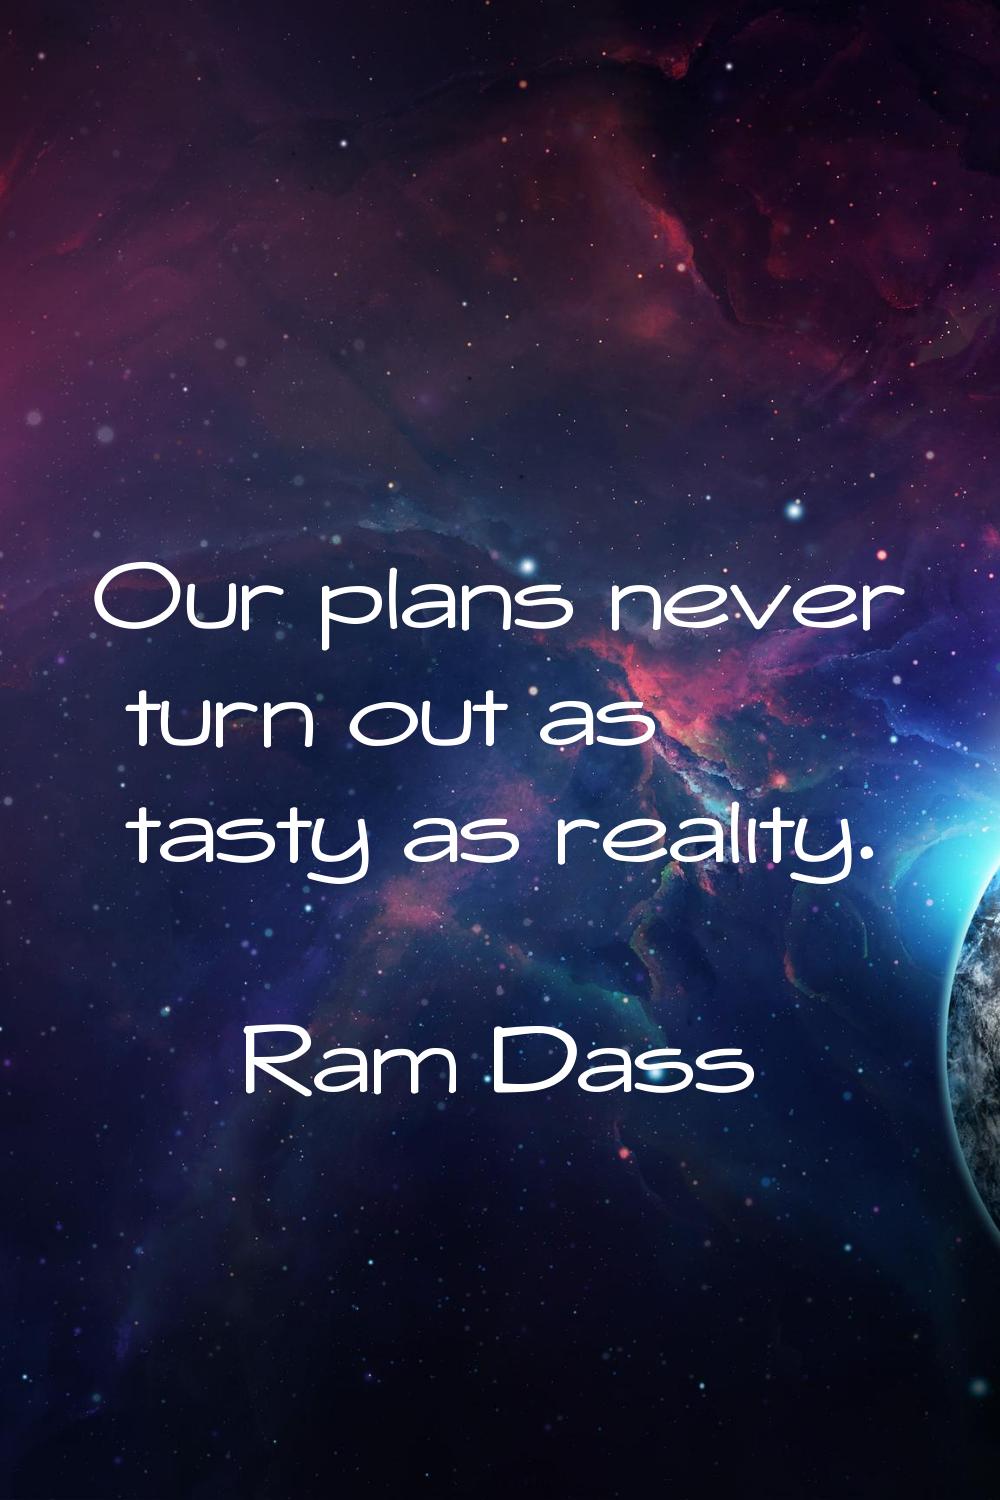 Our plans never turn out as tasty as reality.